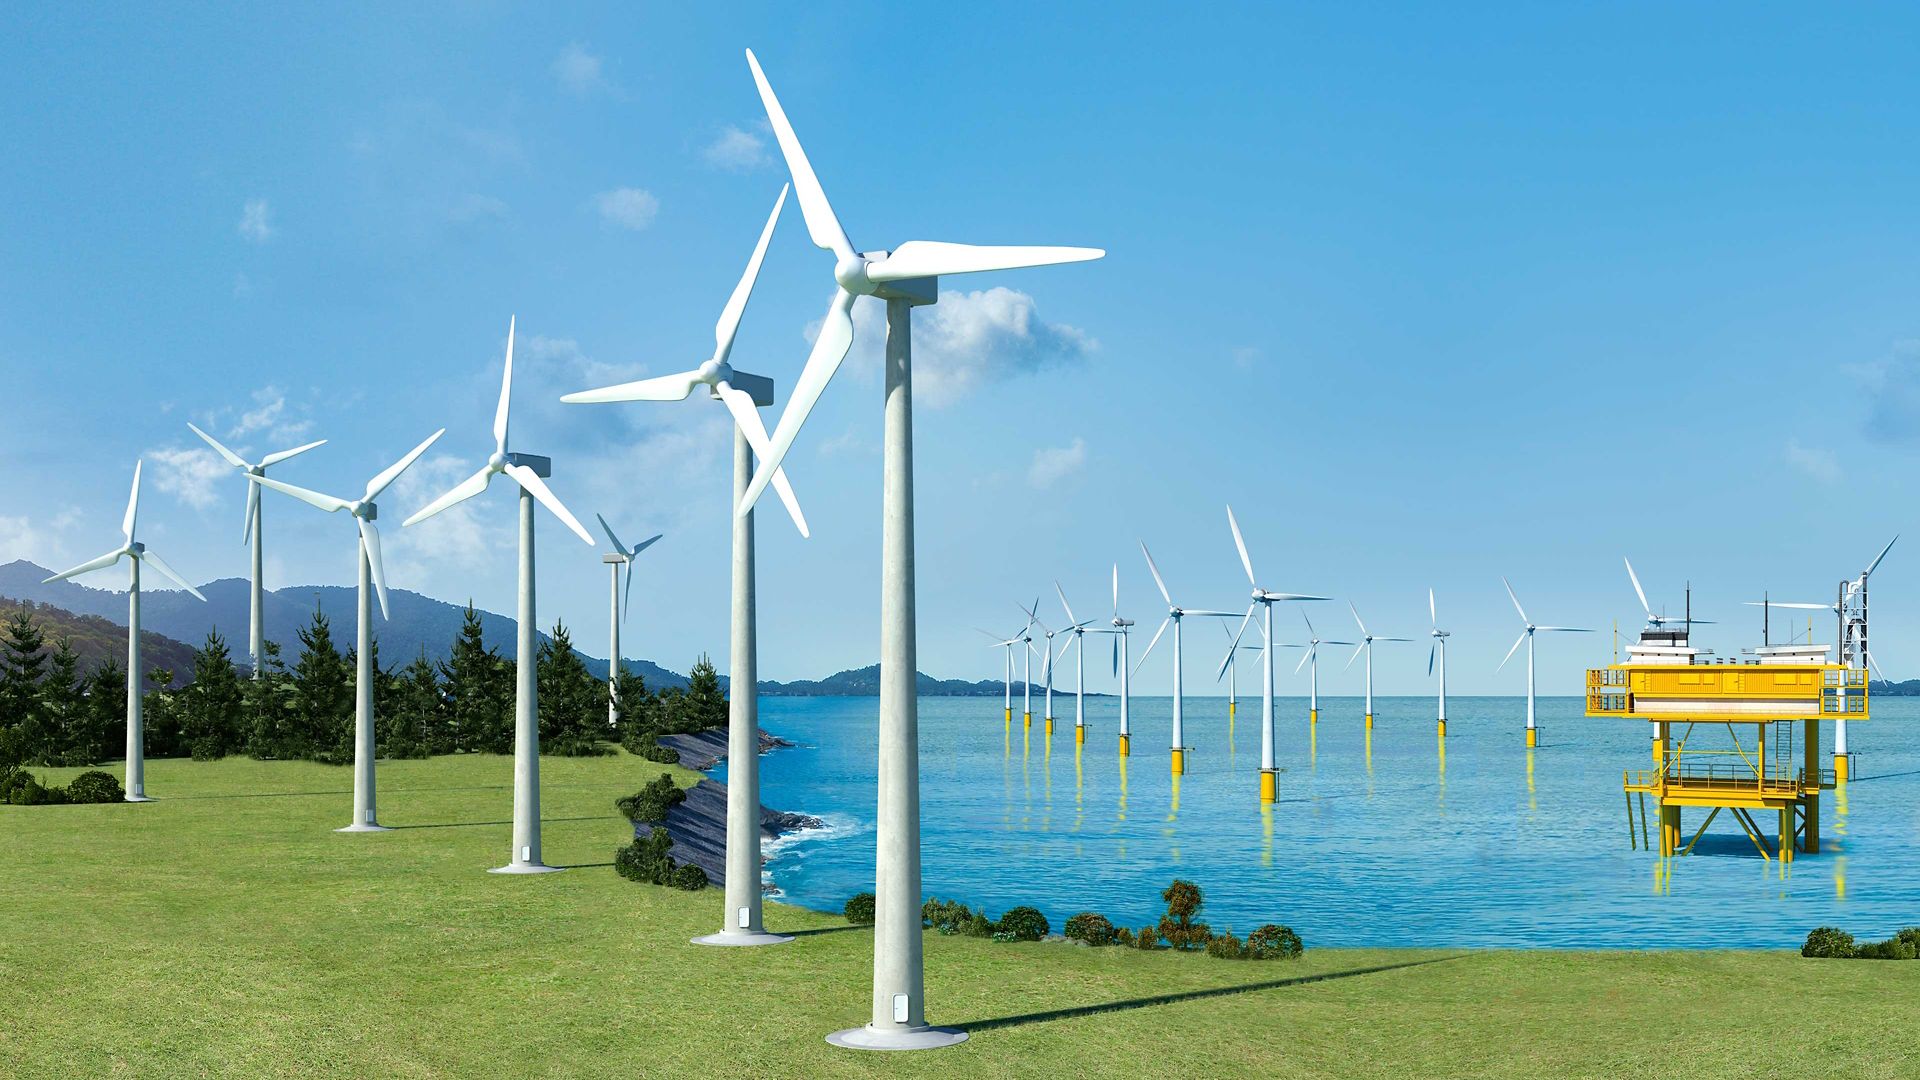 Illustration of onshore and offshore wind turbine farm